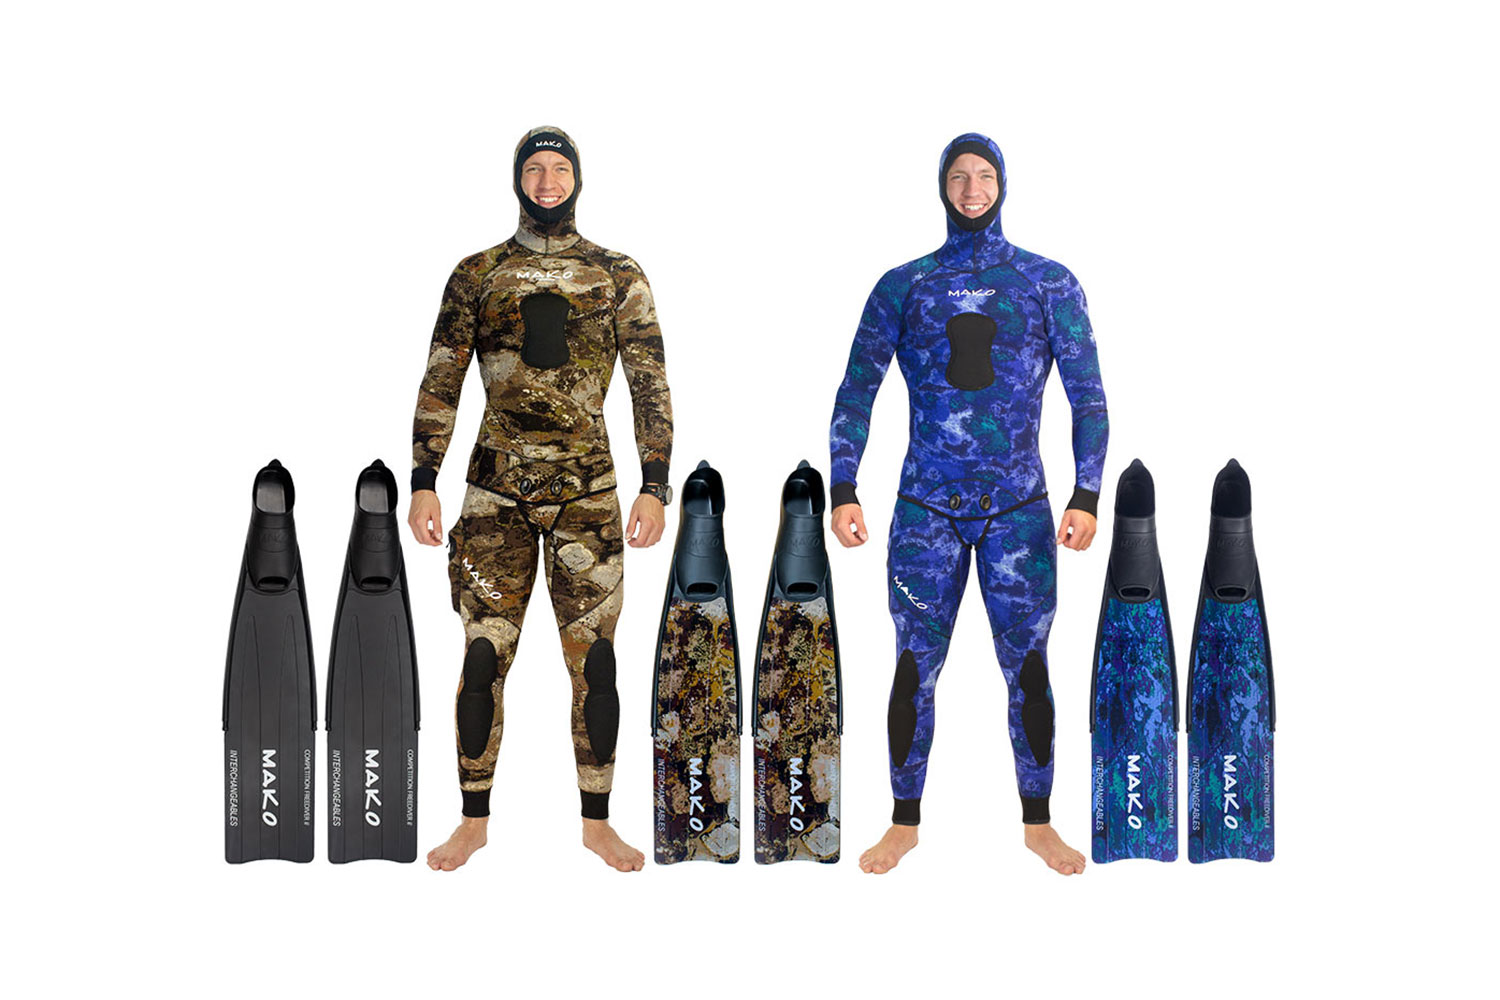 https://www.themanual.com/wp-content/uploads/sites/9/2020/06/mako-competition-ii-fins.jpg?fit=800%2C533&p=1